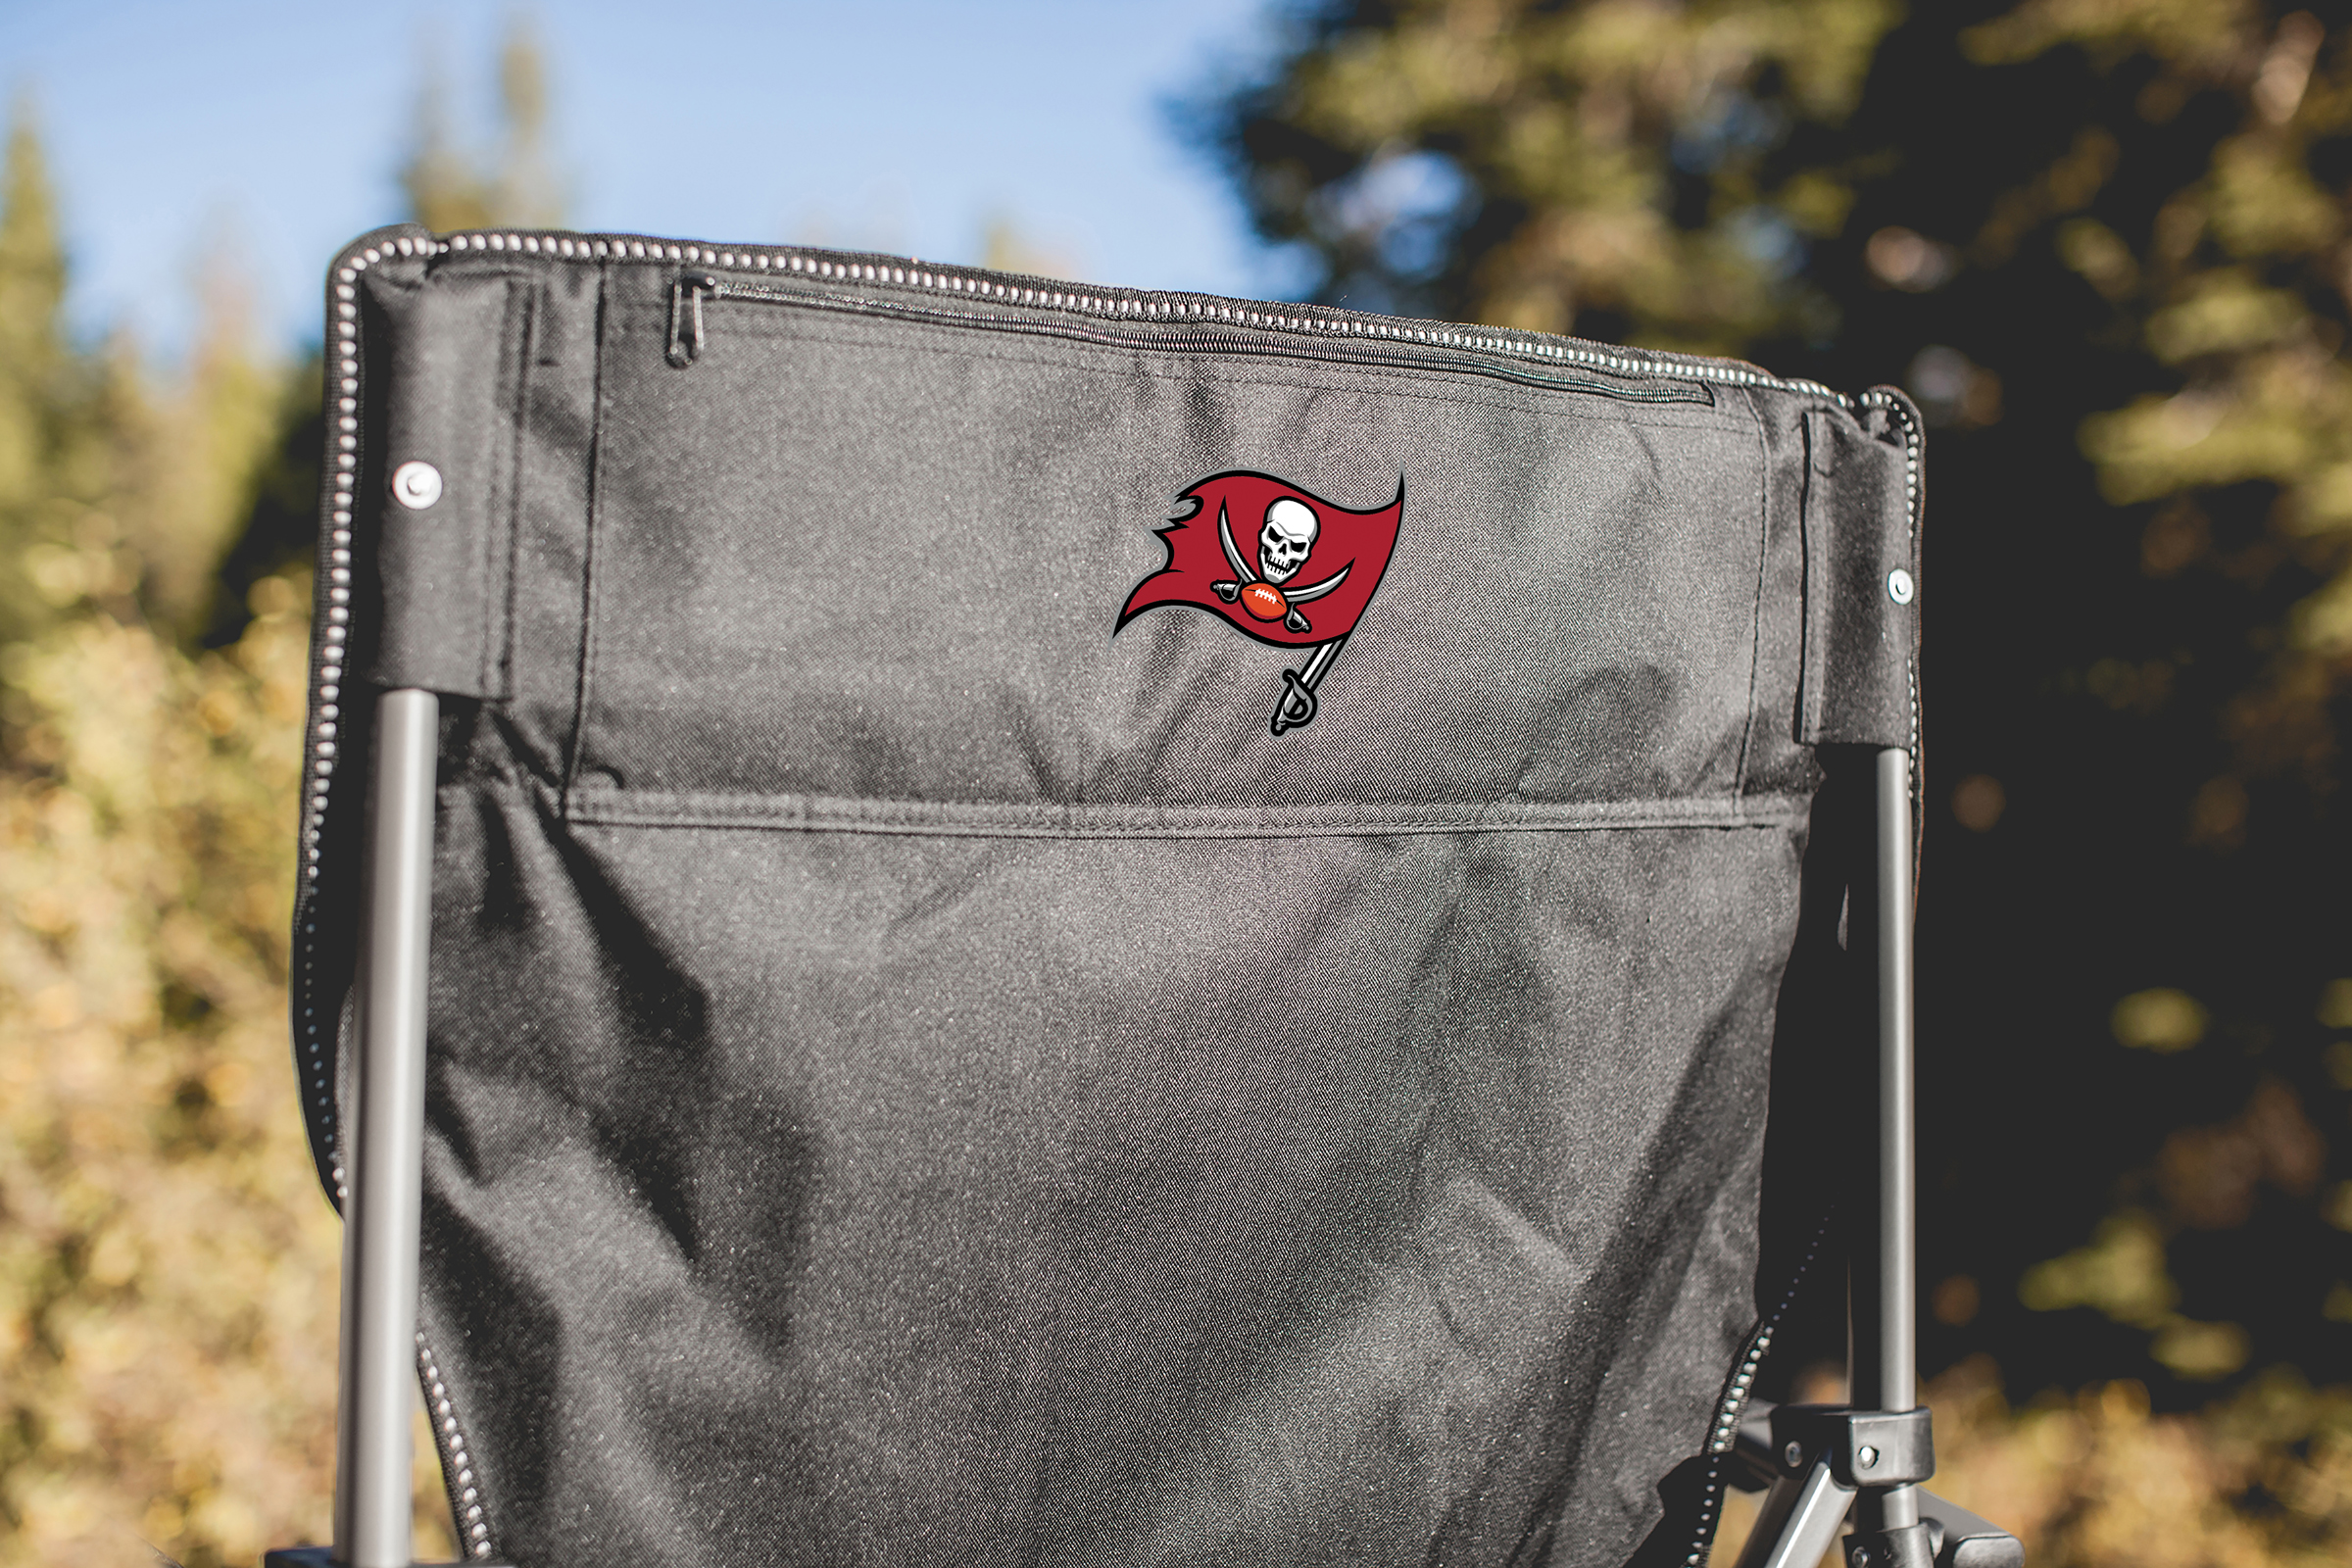 Tampa Bay Buccaneers - Outlander Folding Camping Chair with Cooler